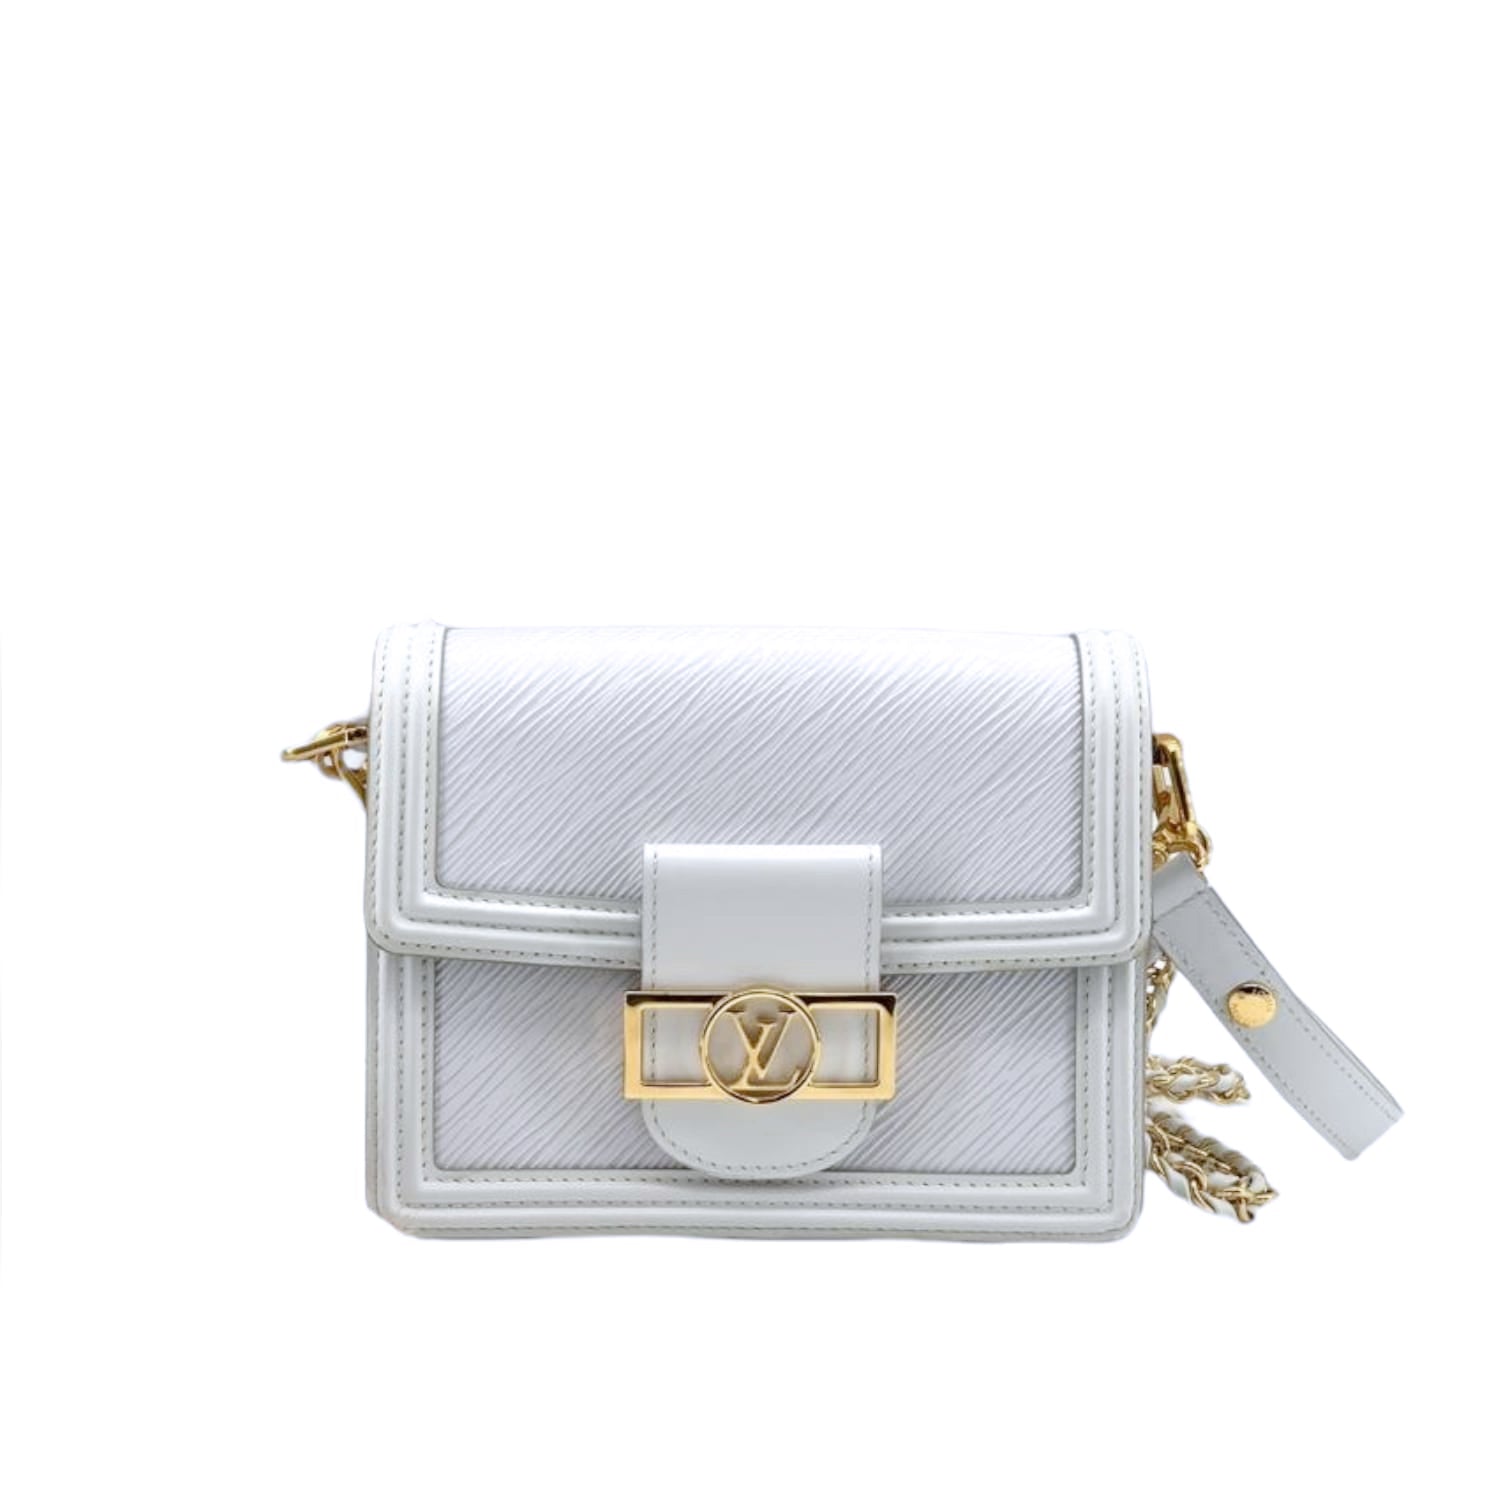 Dauphine leather handbag Louis Vuitton White in Leather - 31319665